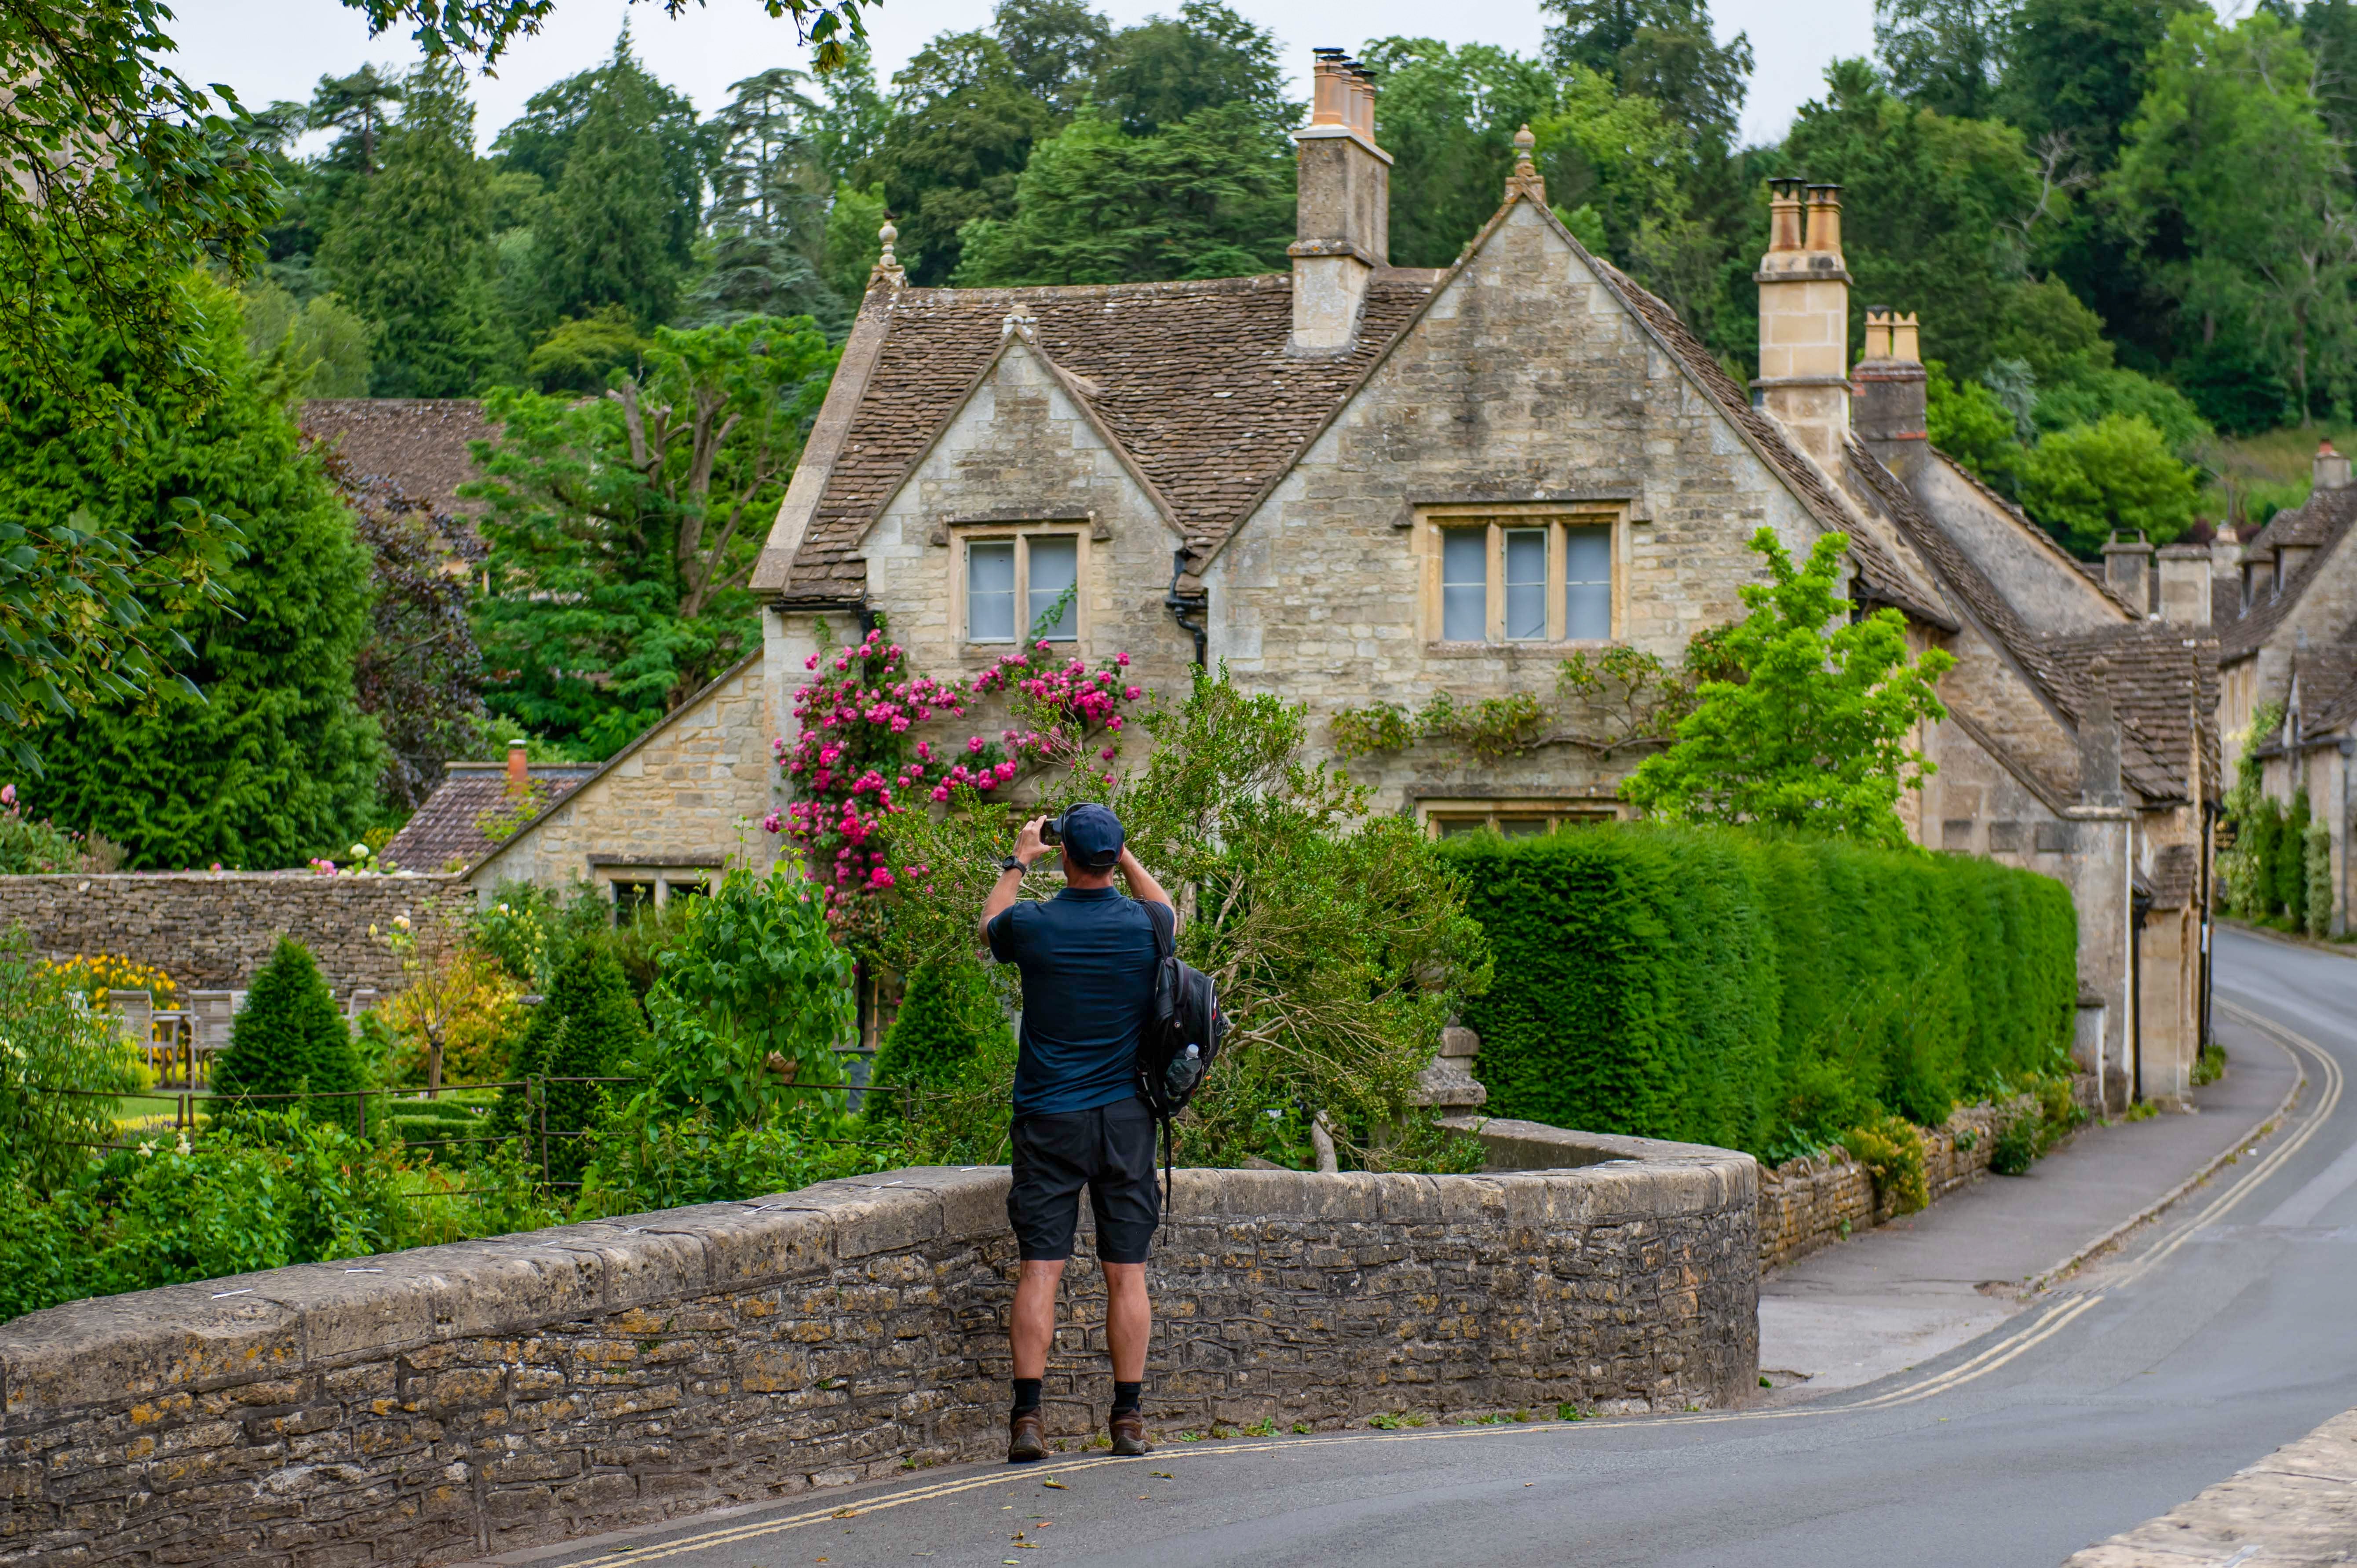 Every year, tourists flock to Castle Combe in their thousands